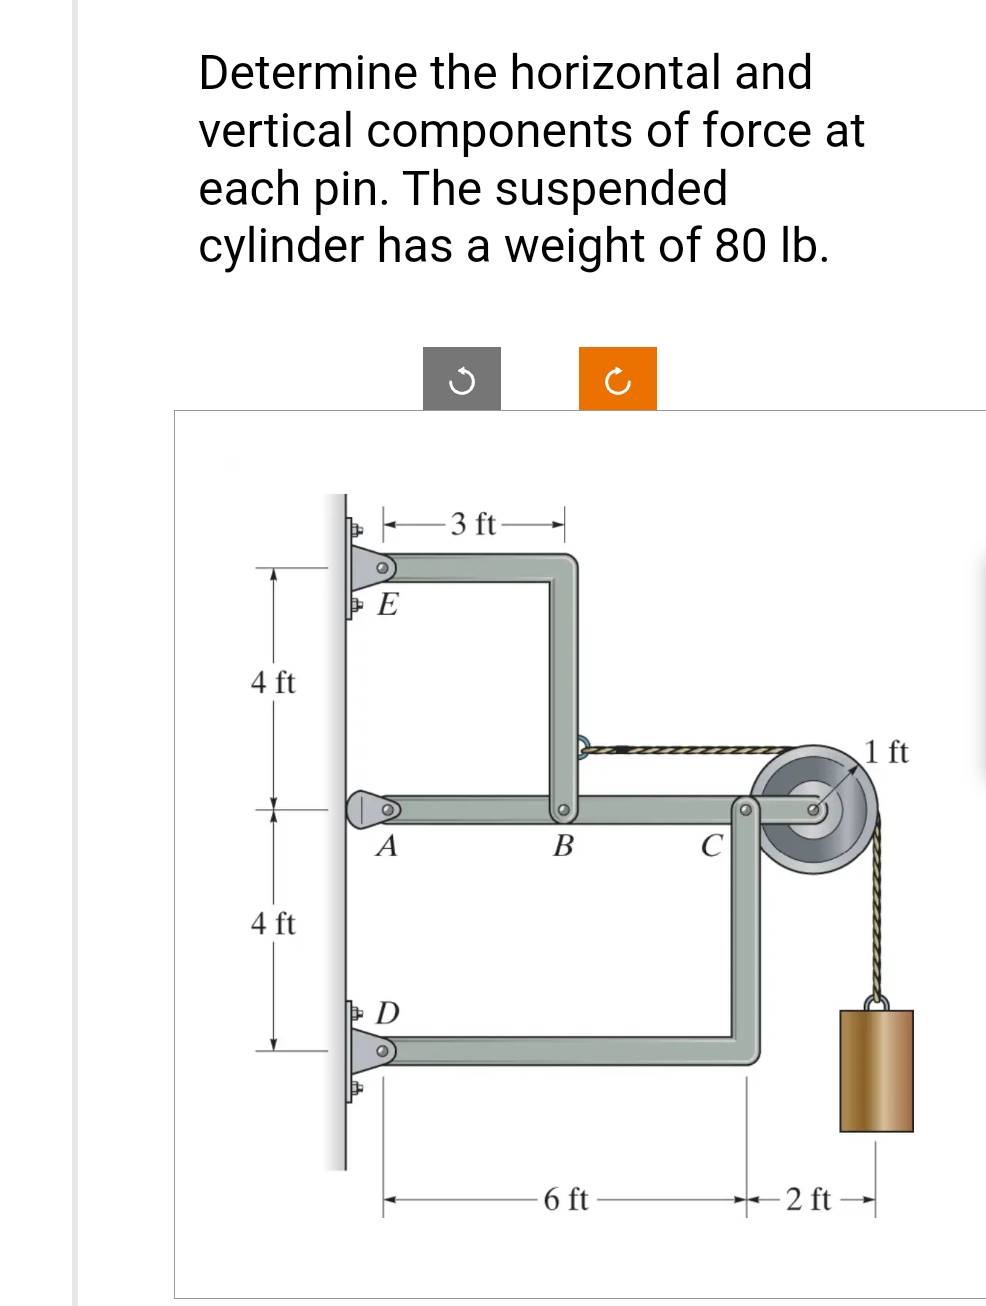 Determine the horizontal and
vertical components of force at
each pin. The suspended
cylinder has a weight of 80 lb.
4 ft
4 ft
E
A
D
-3 ft-
B
6 ft-
2 ft-
1 ft